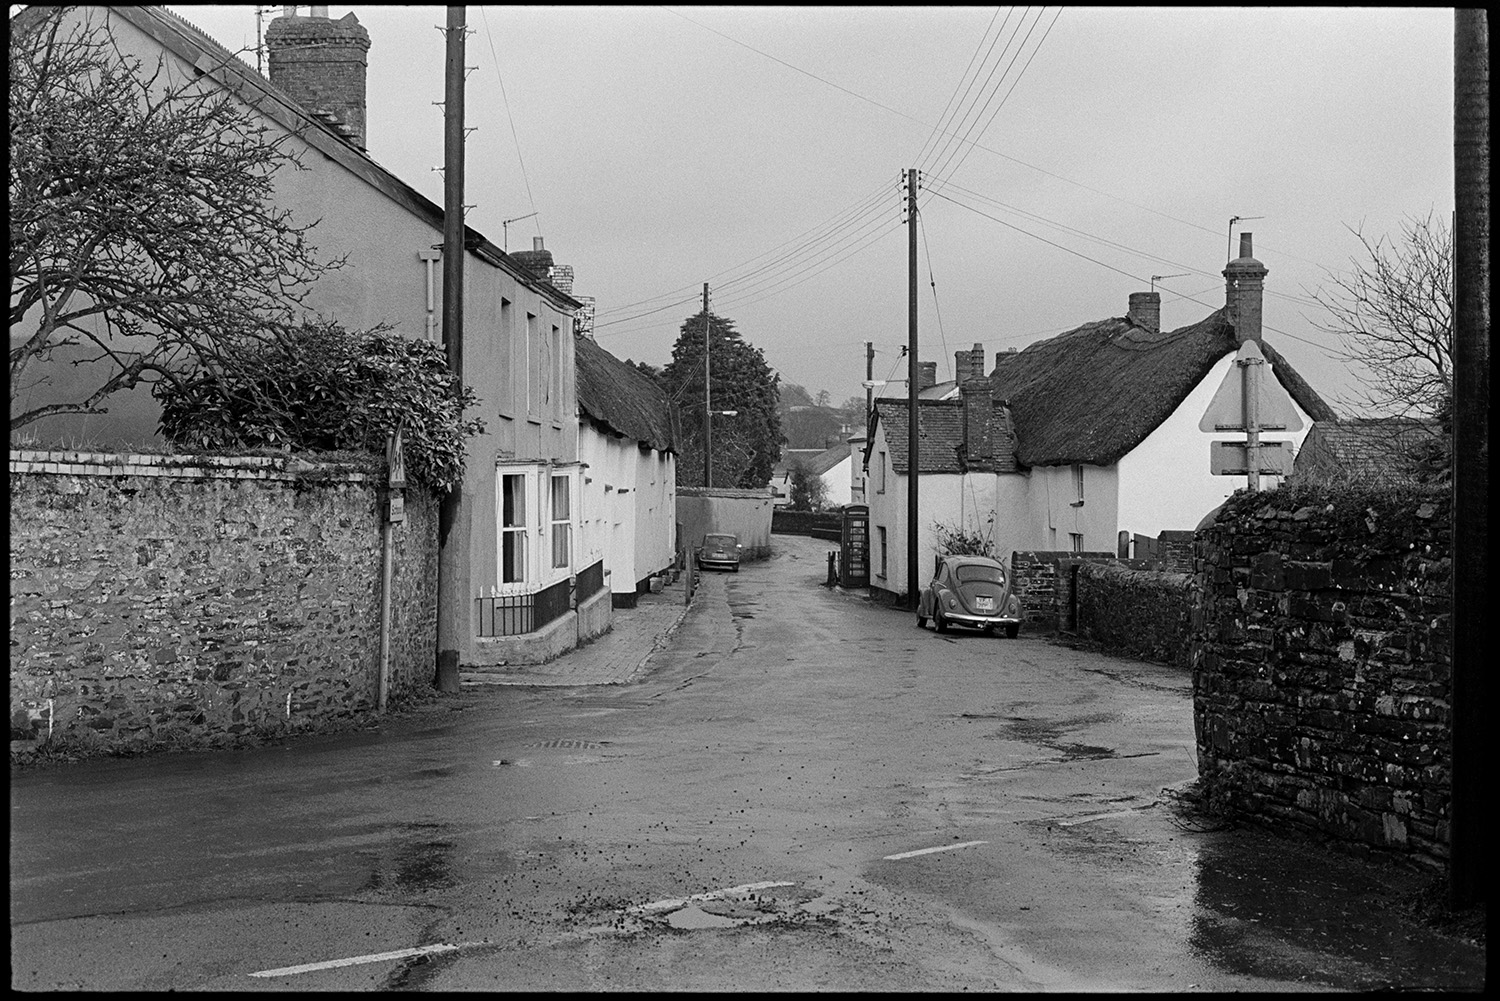 Street scenes, lens test. 
[A view of Fore Street, Dolton with thatched cottages, parked cars and a telephone box. The image was taken during a lens test by James Ravilious.]